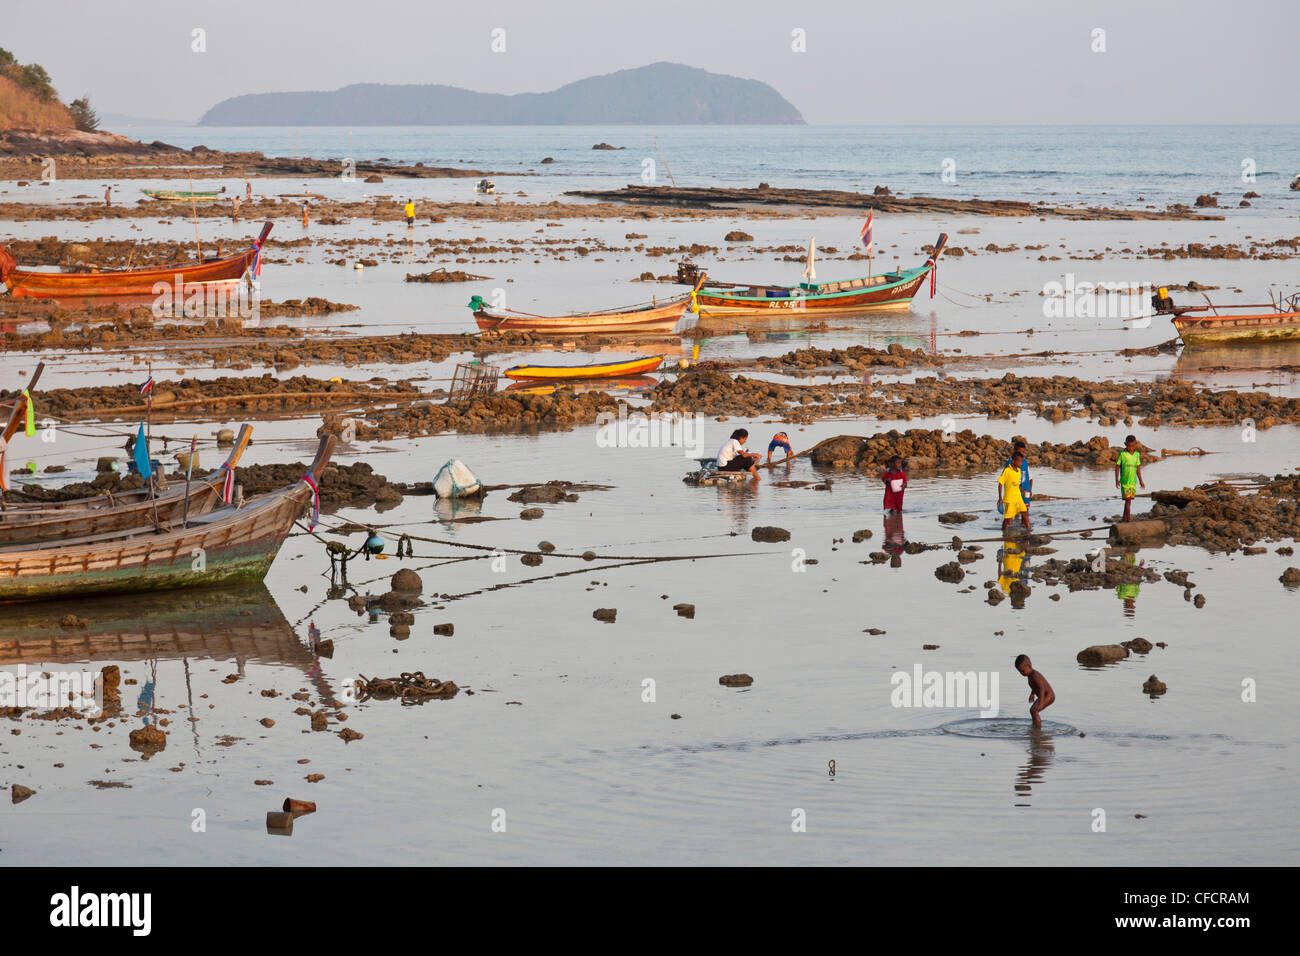 Children playing in the shallow water at low tide, Rawai, Phuket, Thailand, Asia Stock Photo